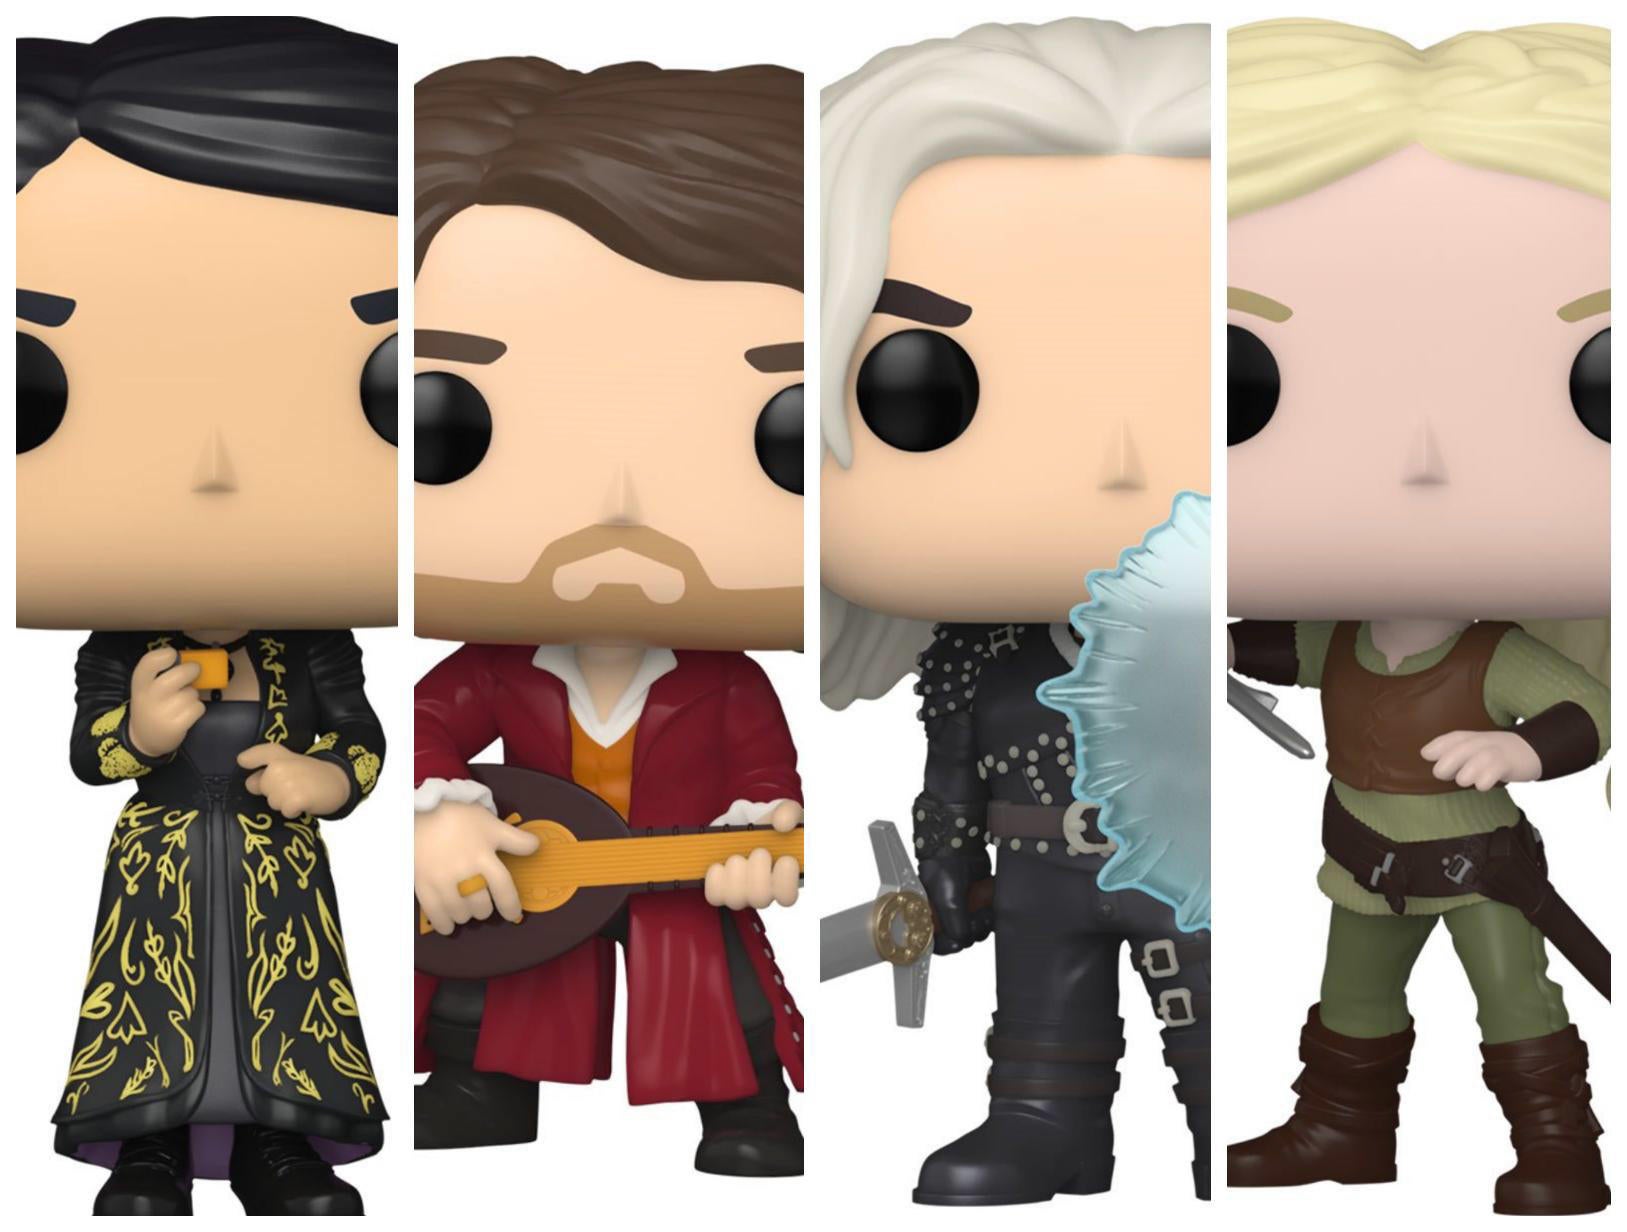 Netflix The Witcher Gets a New Wave Of Pops Ahead of Season 3